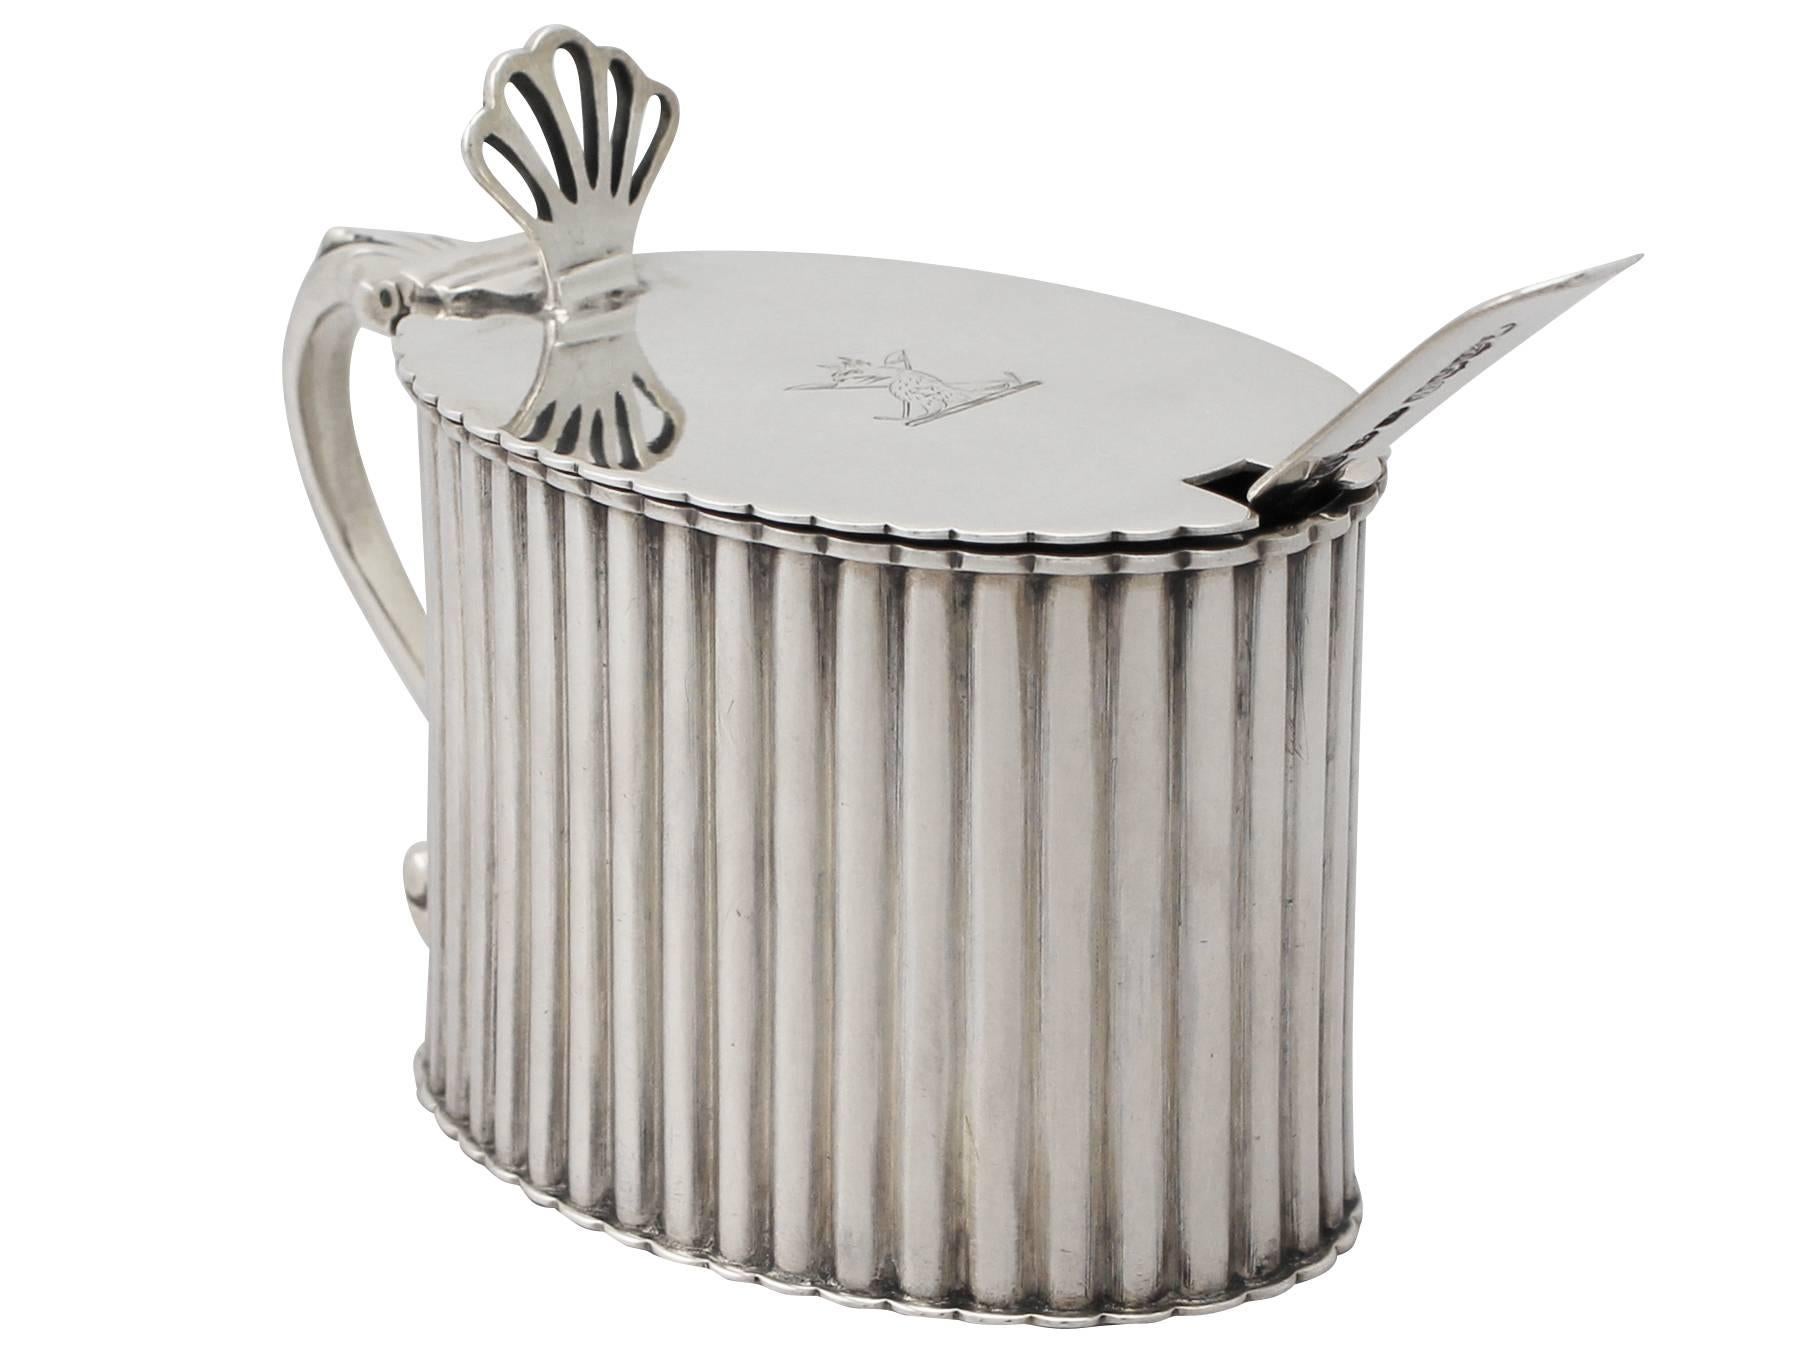 An exceptional, fine and impressive, large antique Victorian English sterling silver mustard pot; an addition to our silver condiments collection.

This fine antique Victorian sterling silver mustard pot has an oval form.

The body is encircled